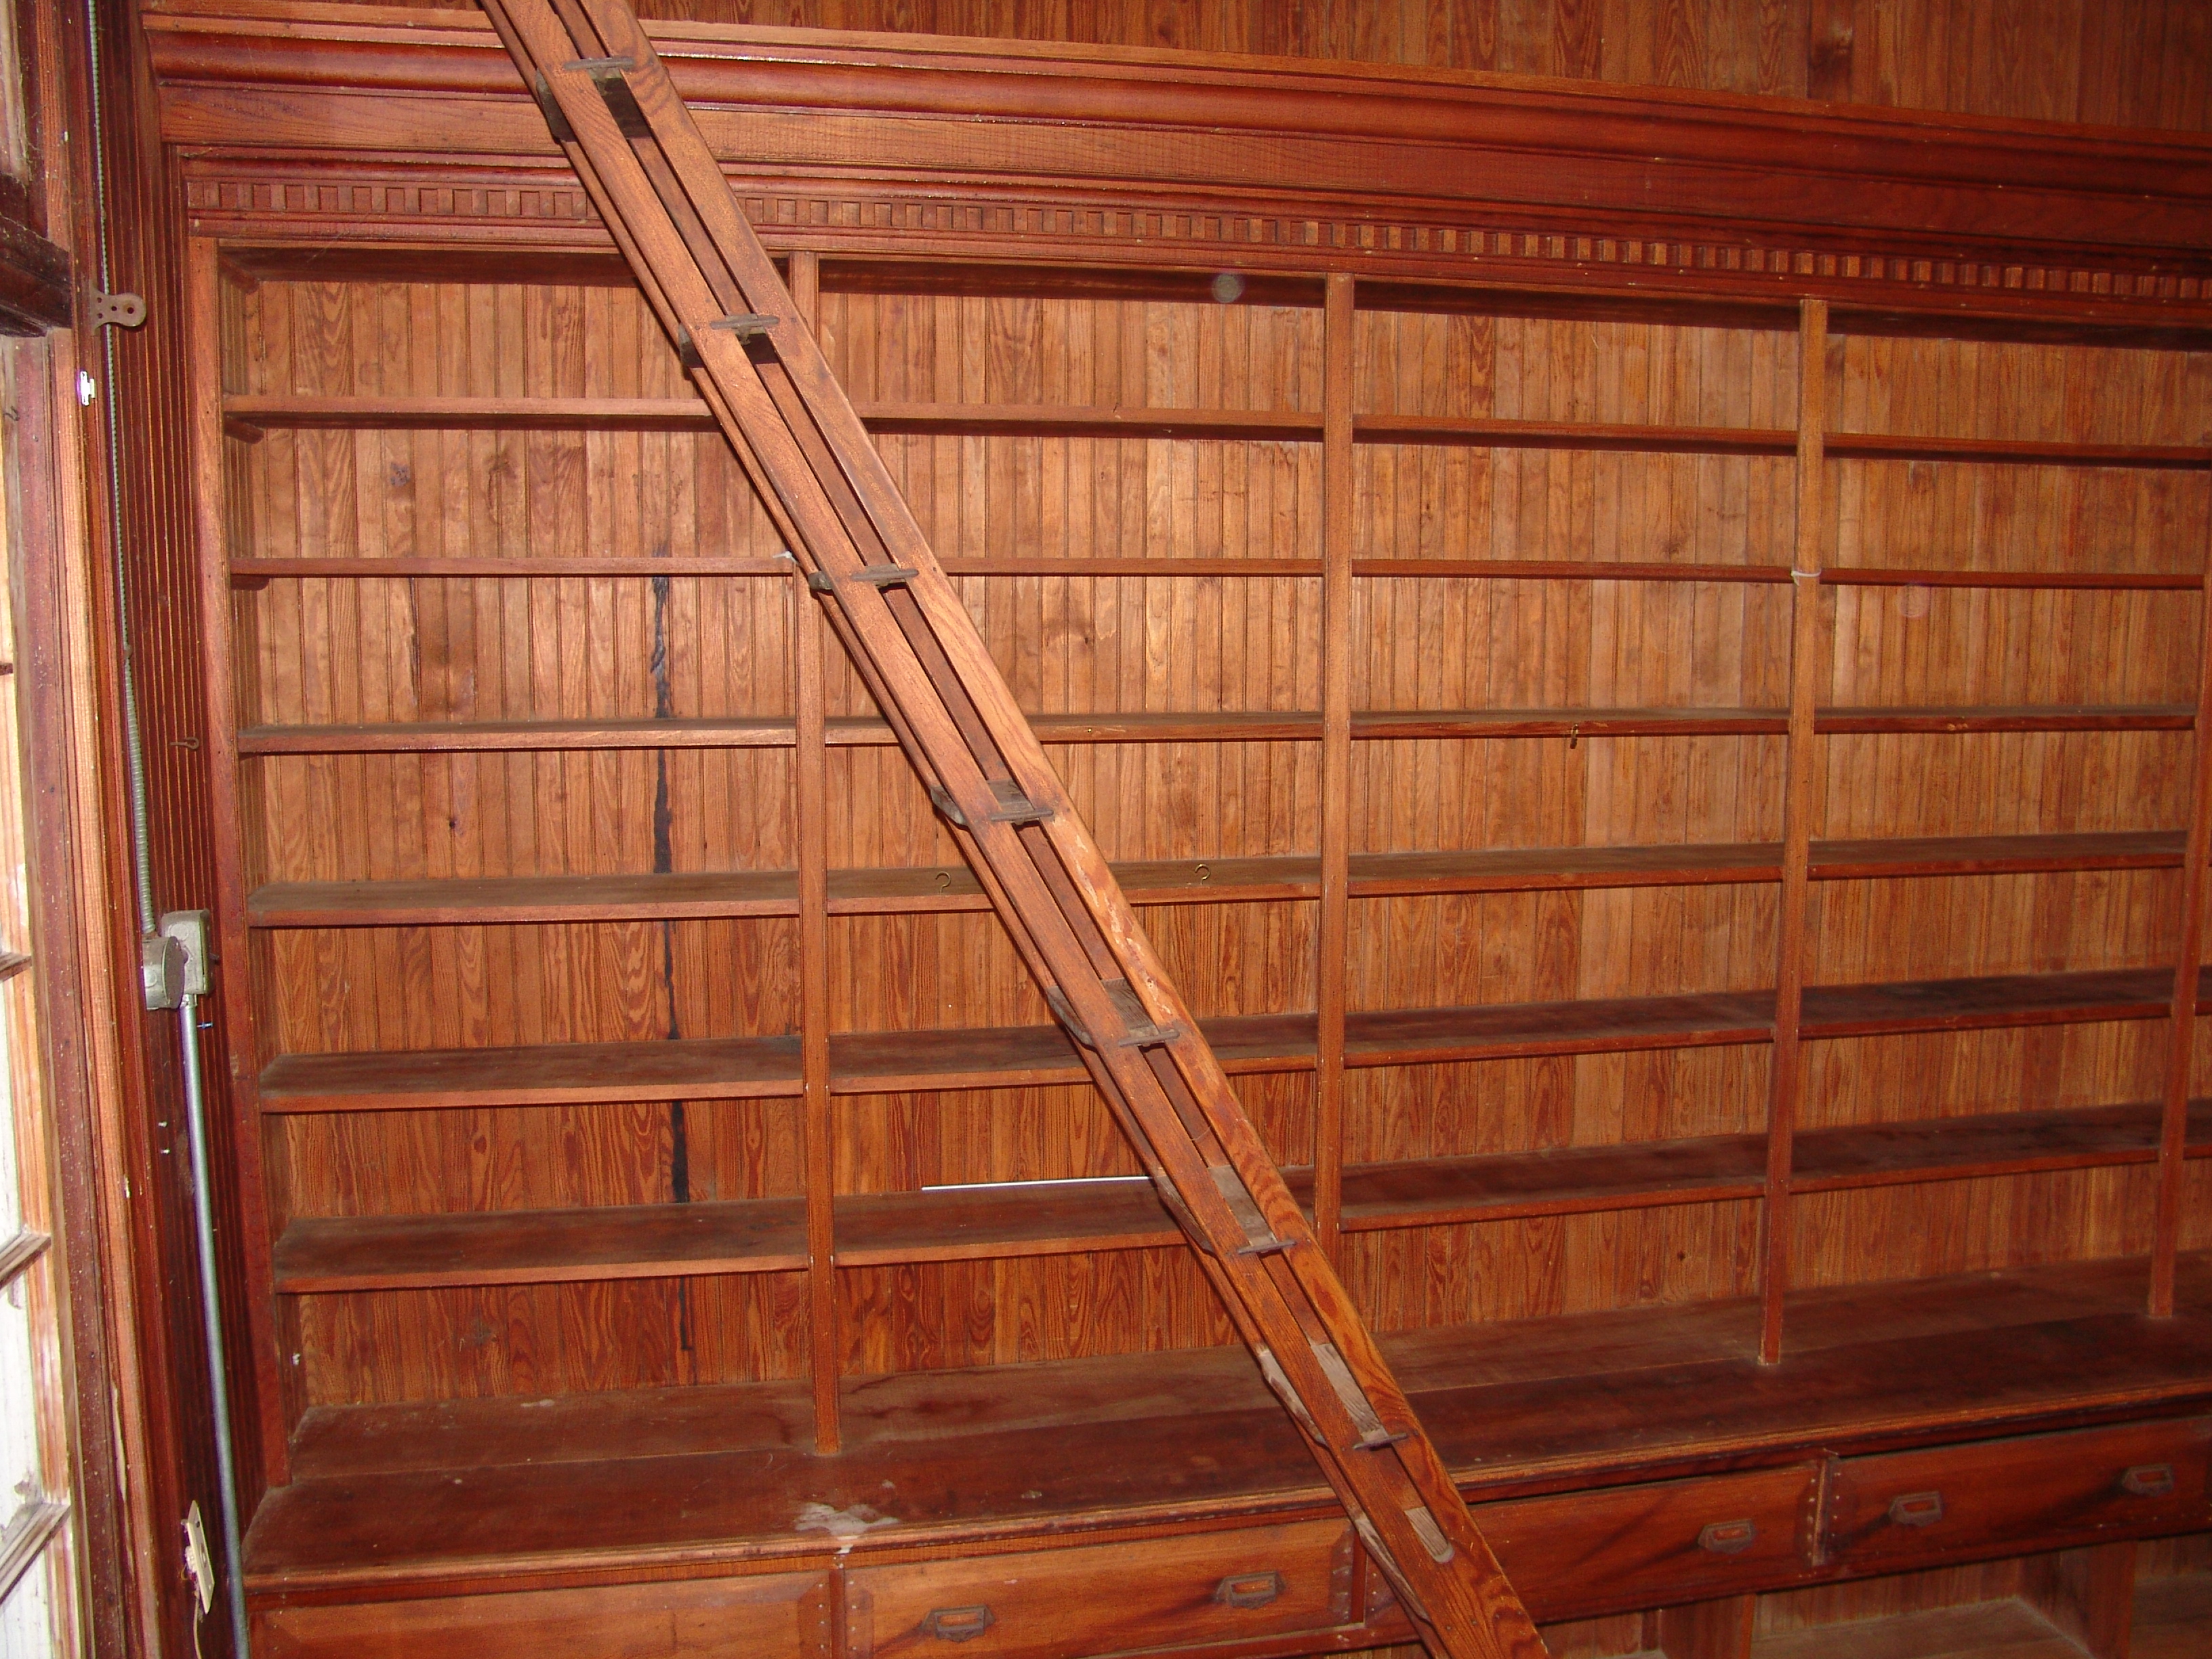 Original rolling ladders and shelving.